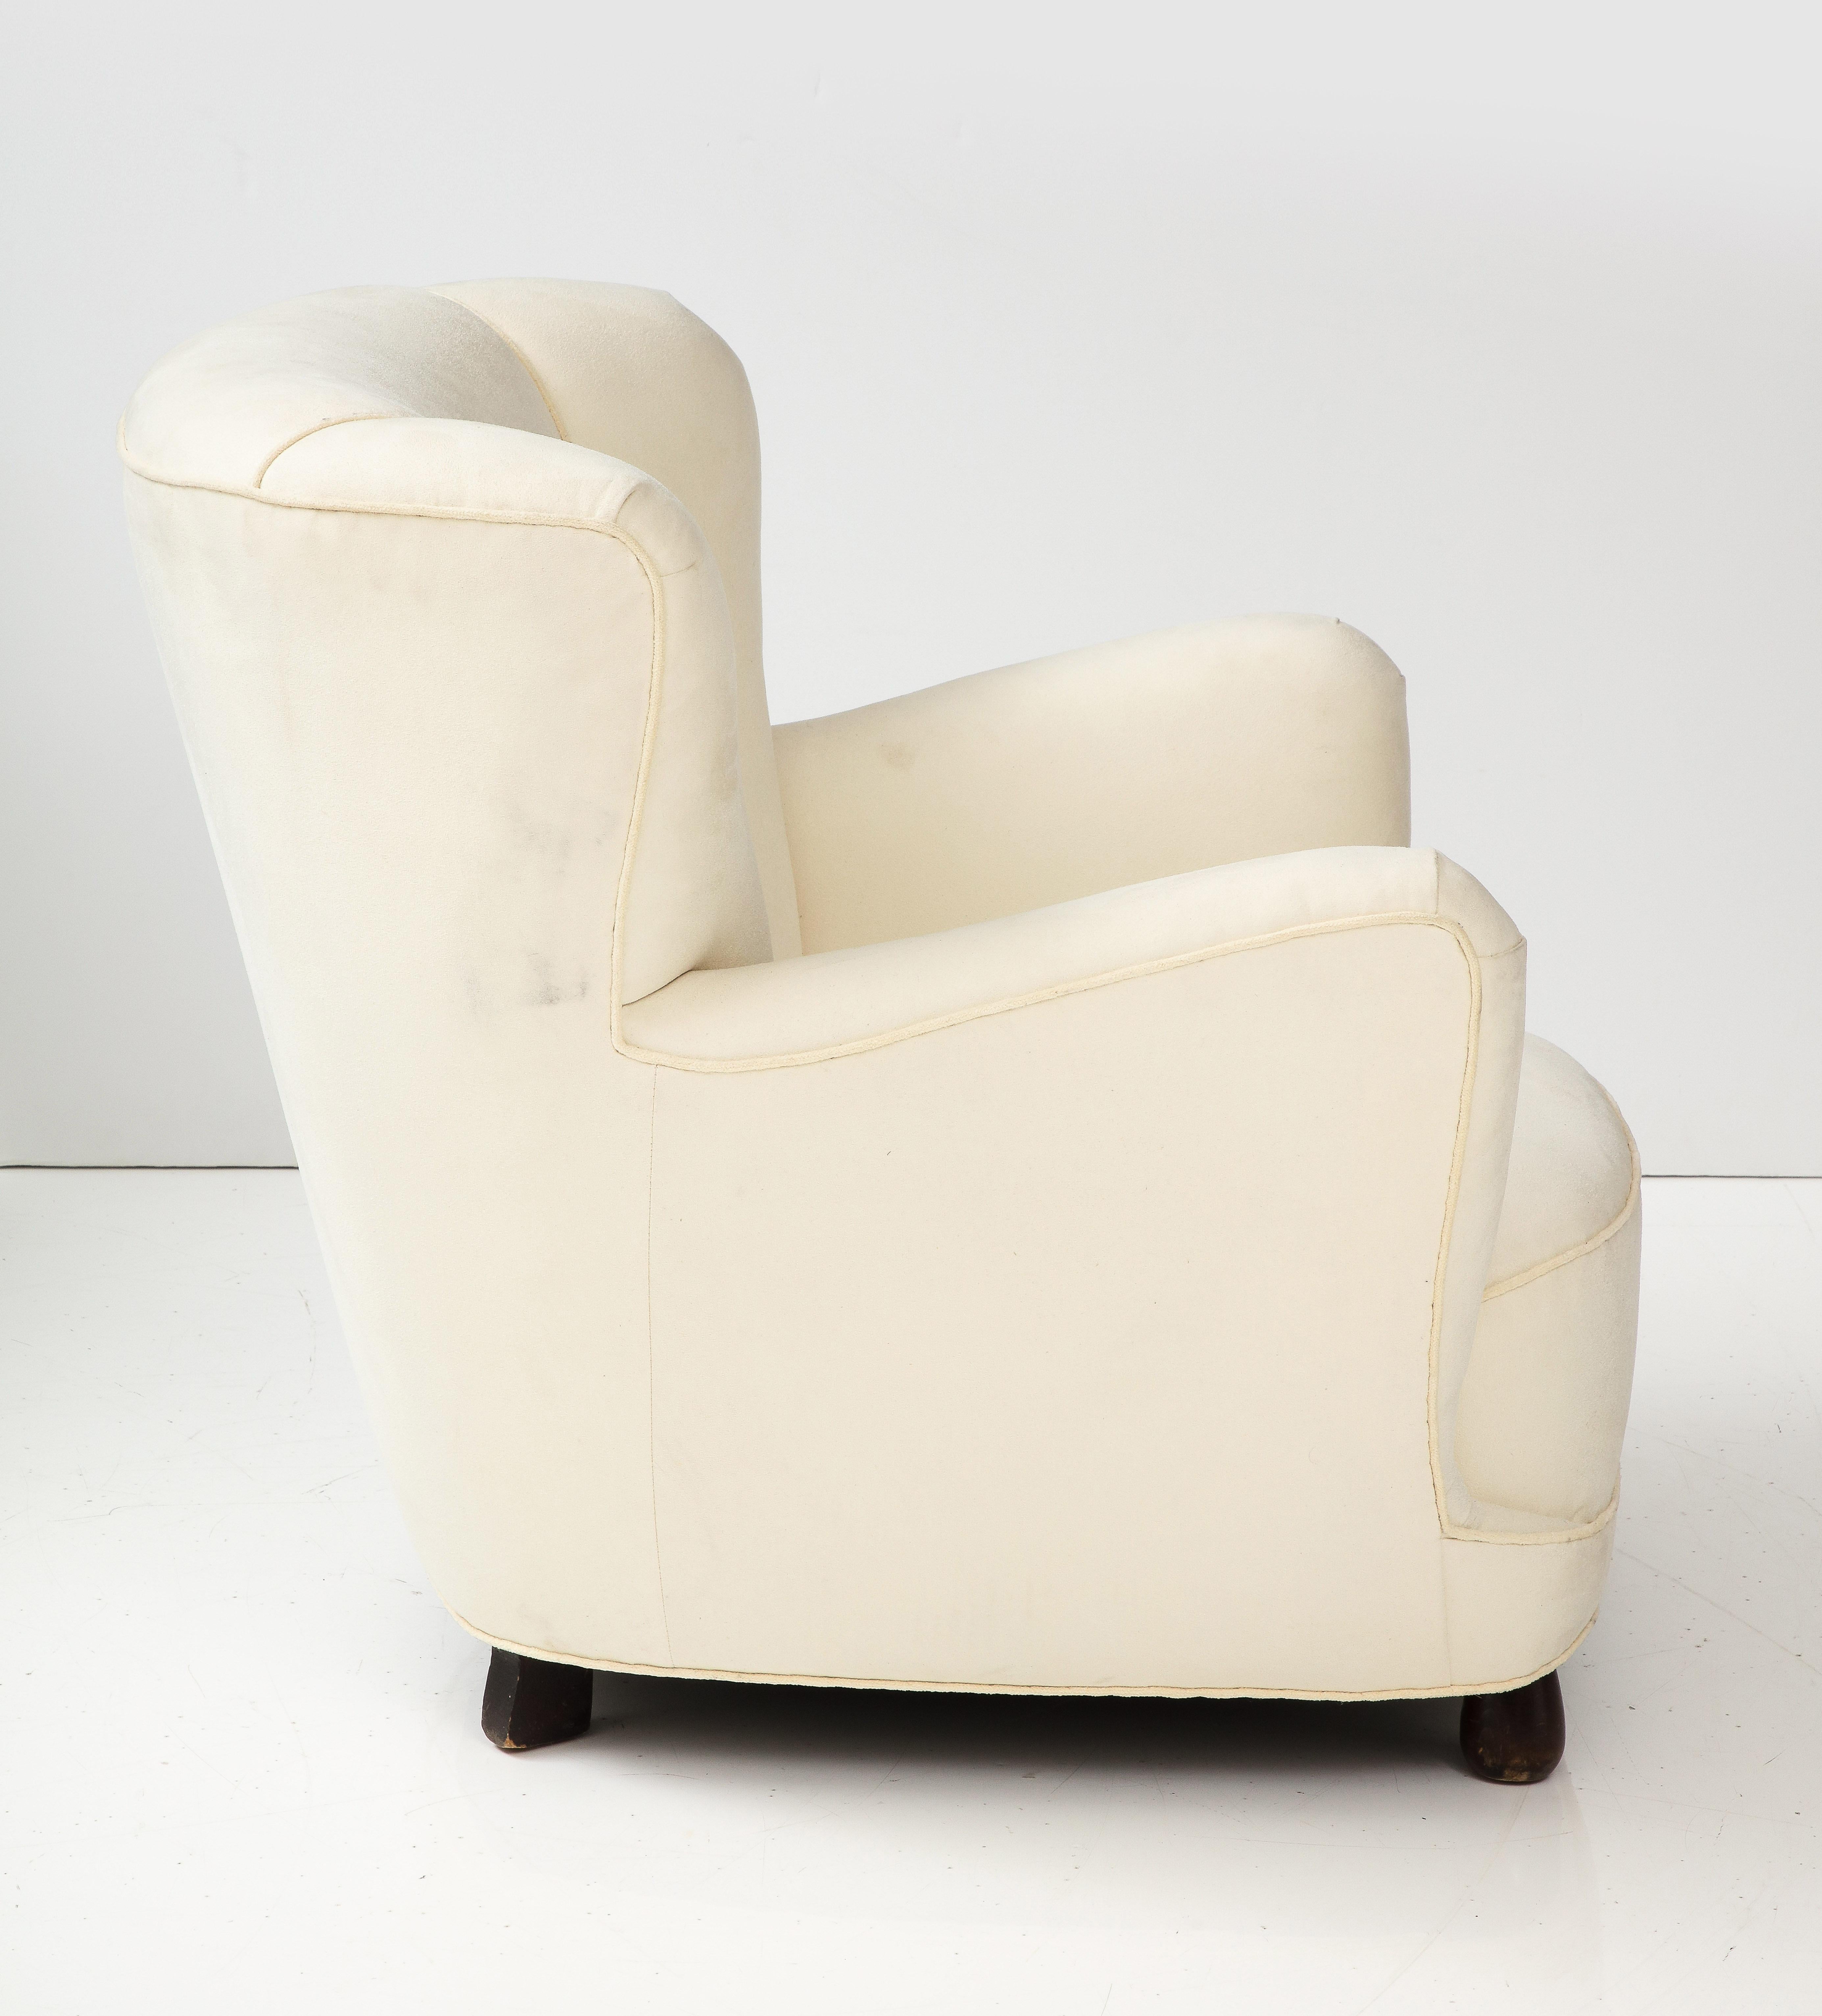 Danish Upholstered Club Chair in Muslin, 1940's For Sale 8